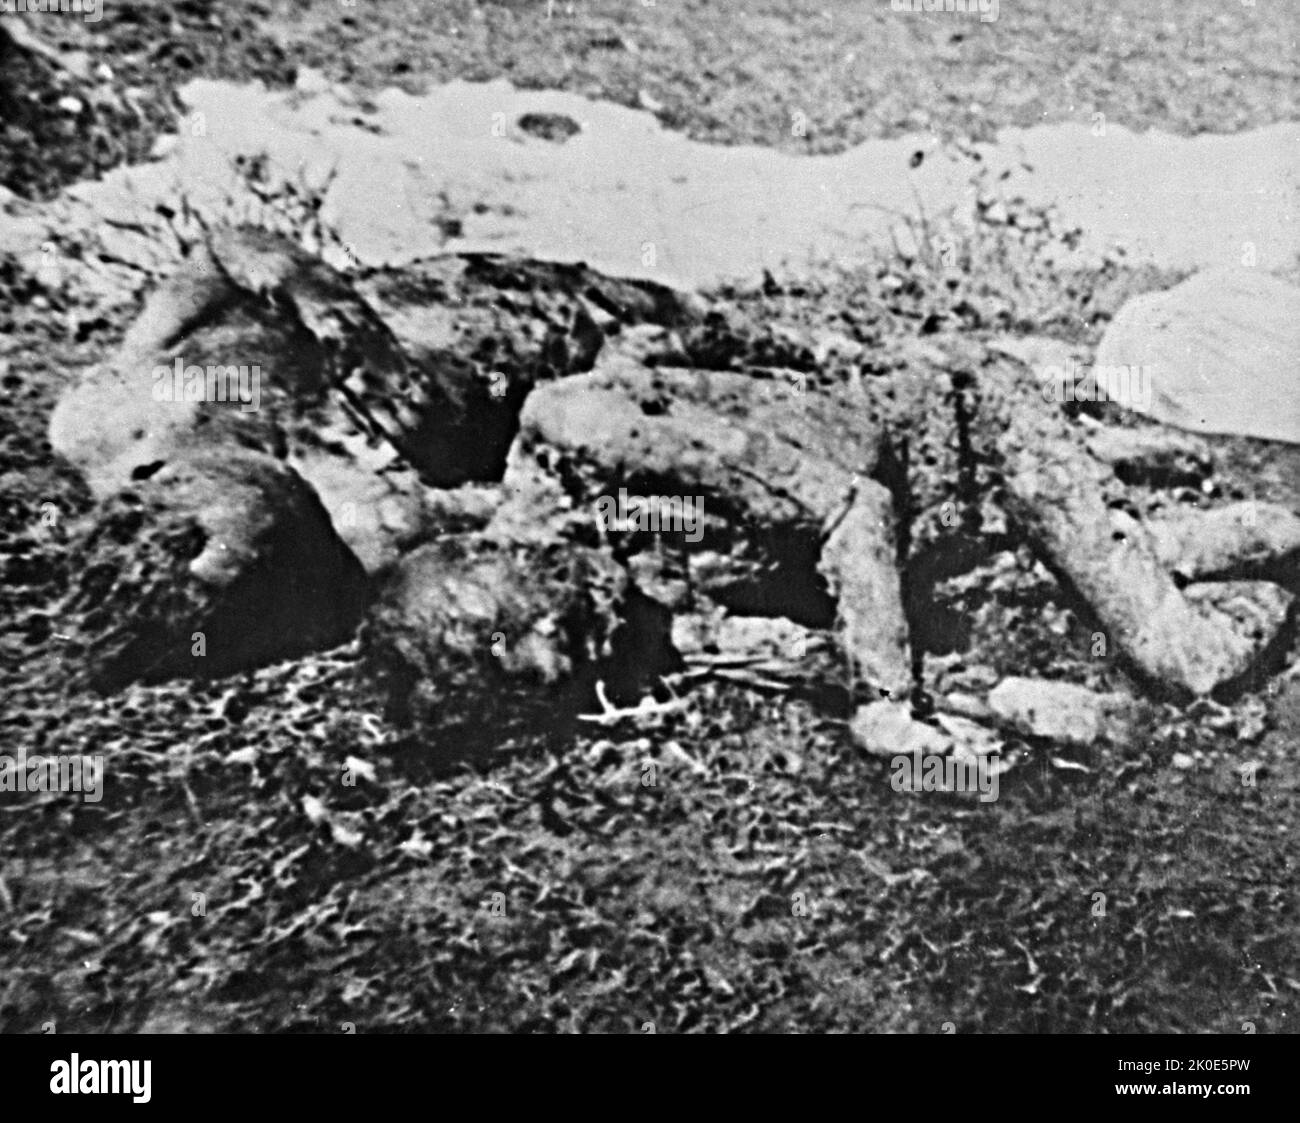 The bodies of prisoners executed by the Ustasa in Jasenovac. The Ustasa (Croatian Revolutionary Movement) or Ustase was a Croatian fascist organization, between 1929 and 1945. Jasenovac was a concentration and extermination camp established in occupied Yugoslavia during World War II. Stock Photo